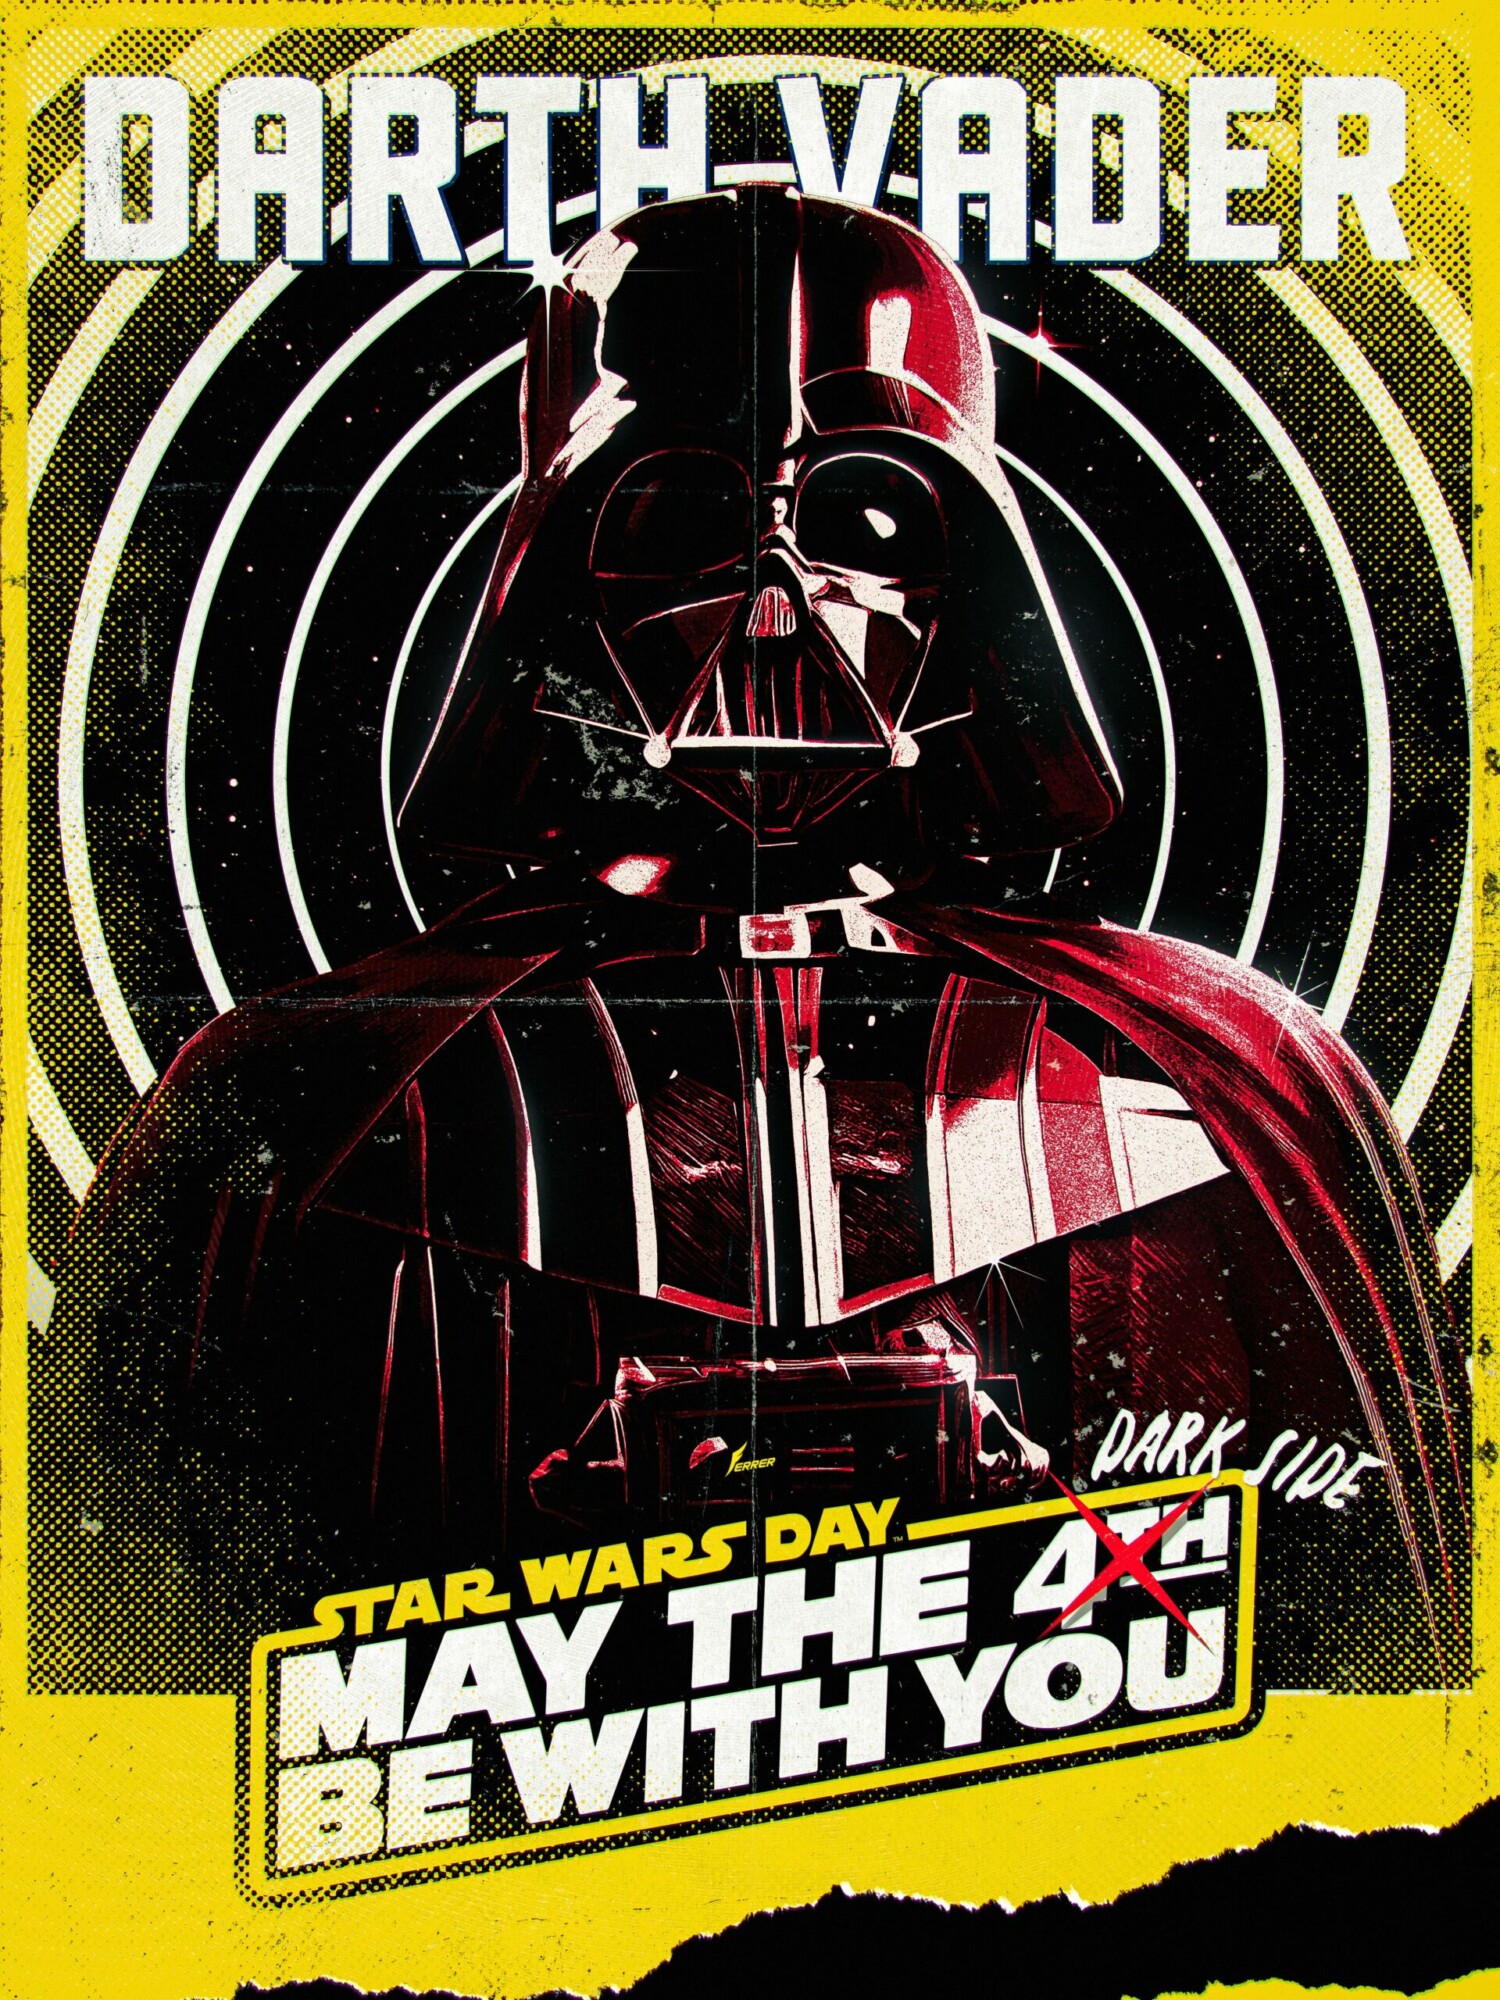 May the 4th be with You POSTER Art